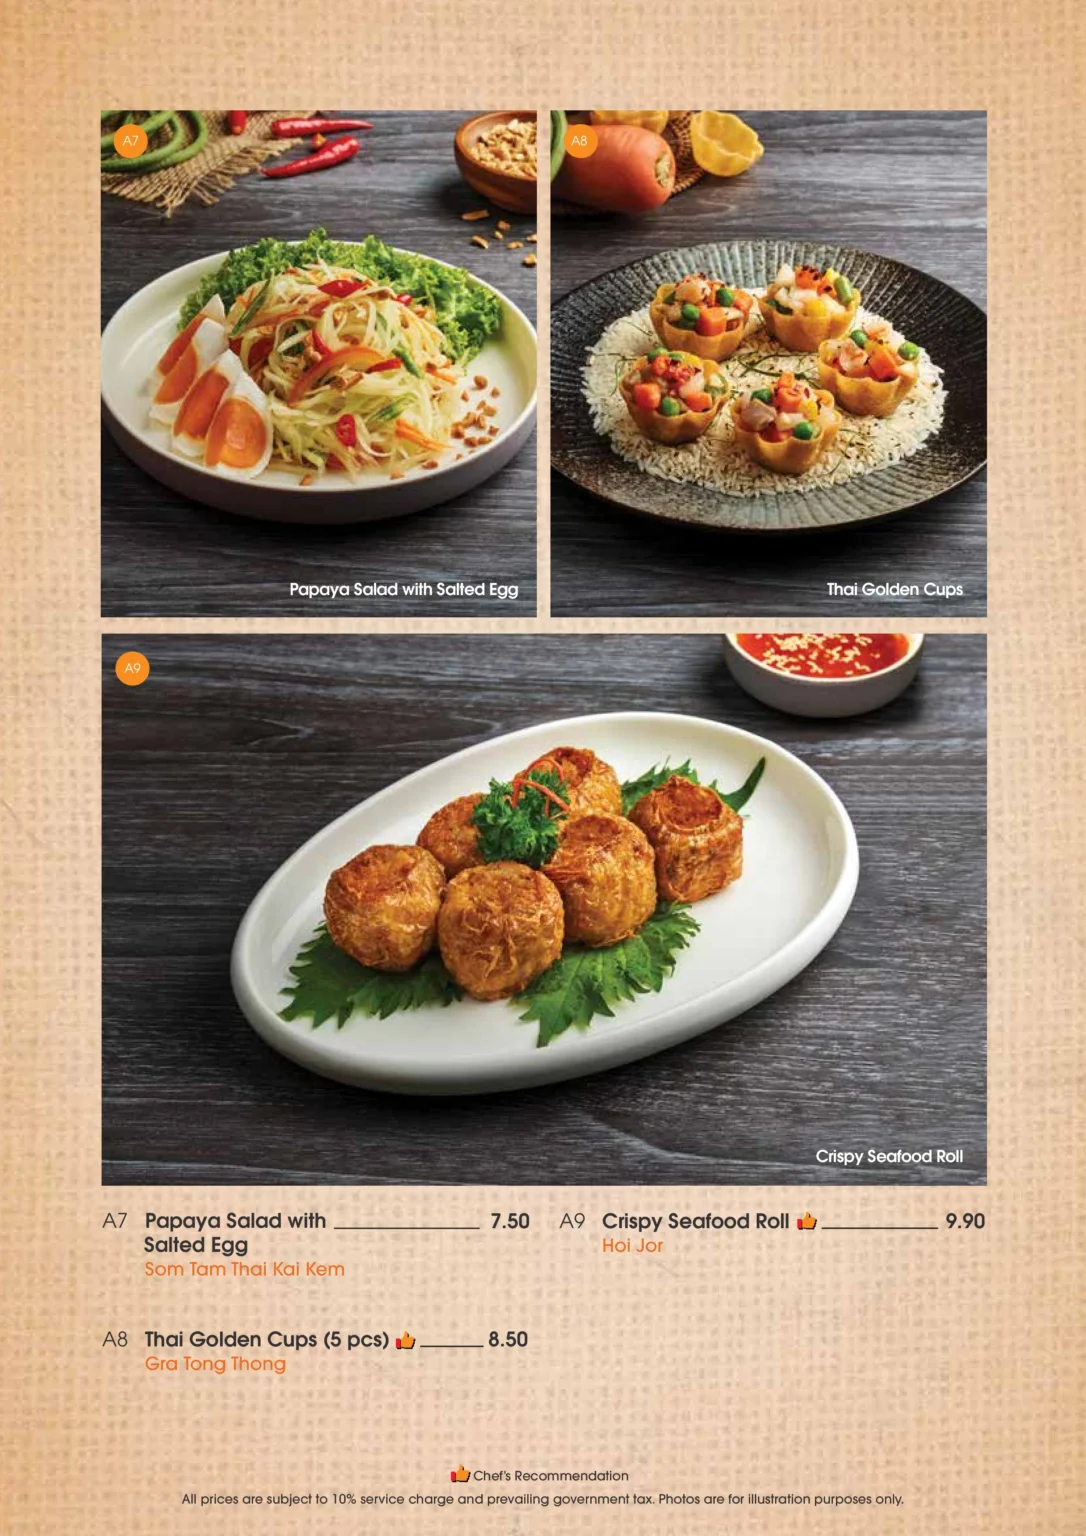 SAVEUR THAI APPETIZERS MENU WITH PRICES